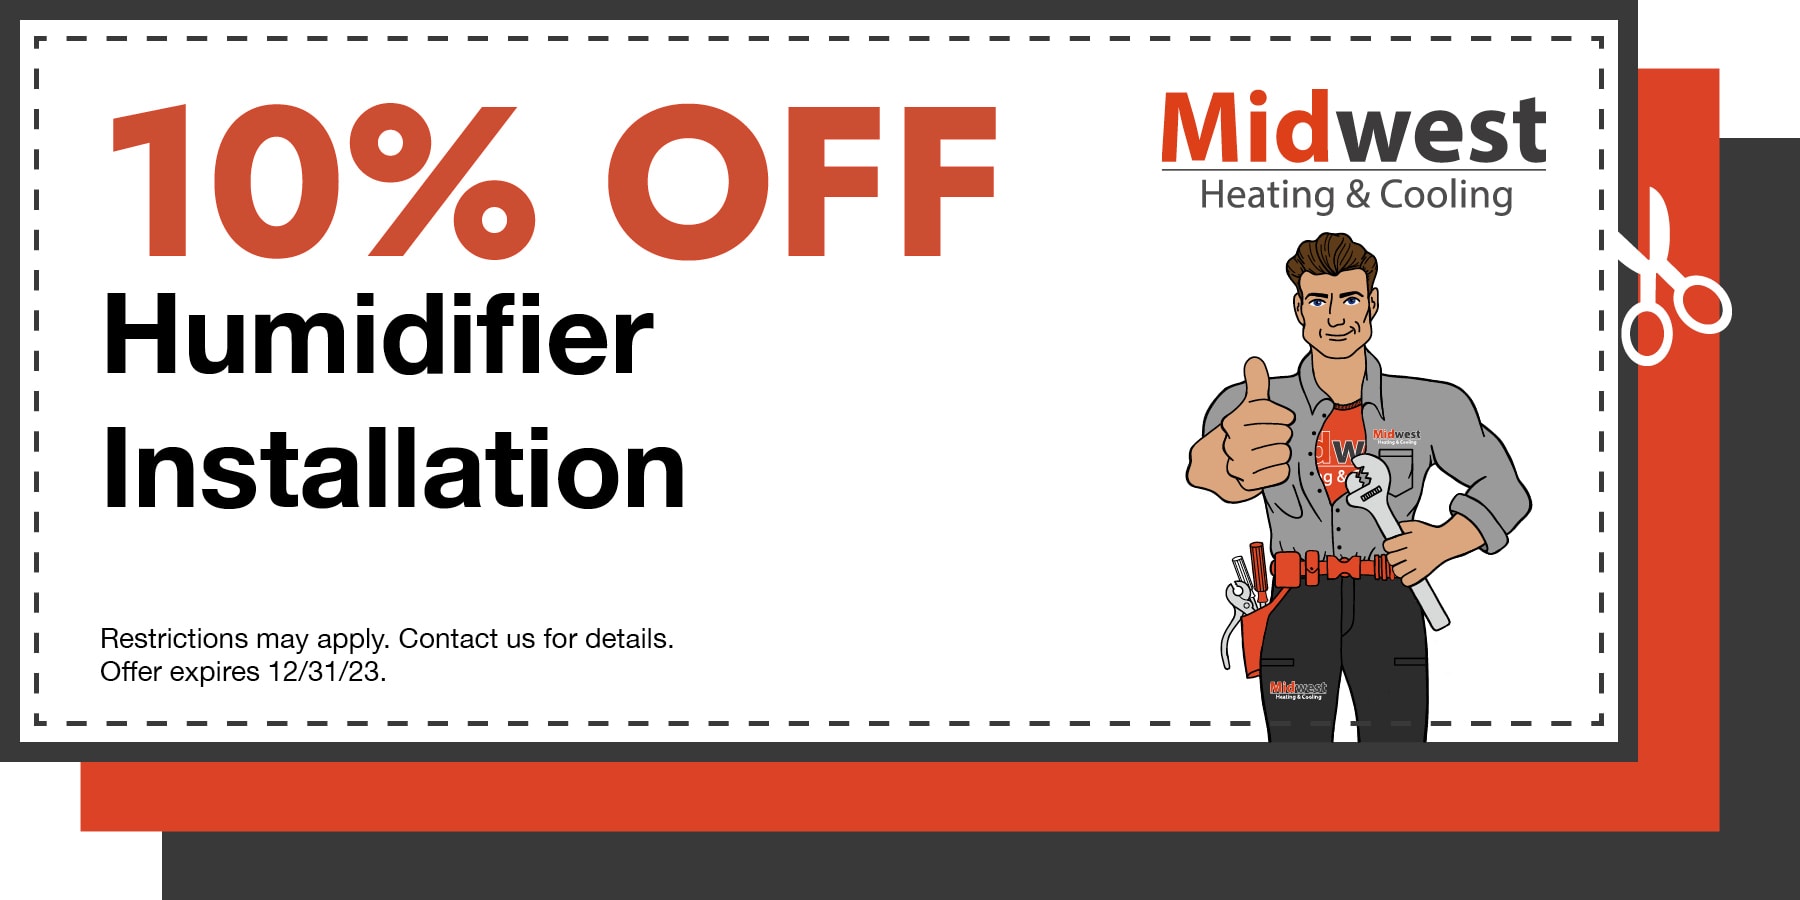 10% off humidifier installation. Restrictions may apply. Offer expires 12/31/2023.